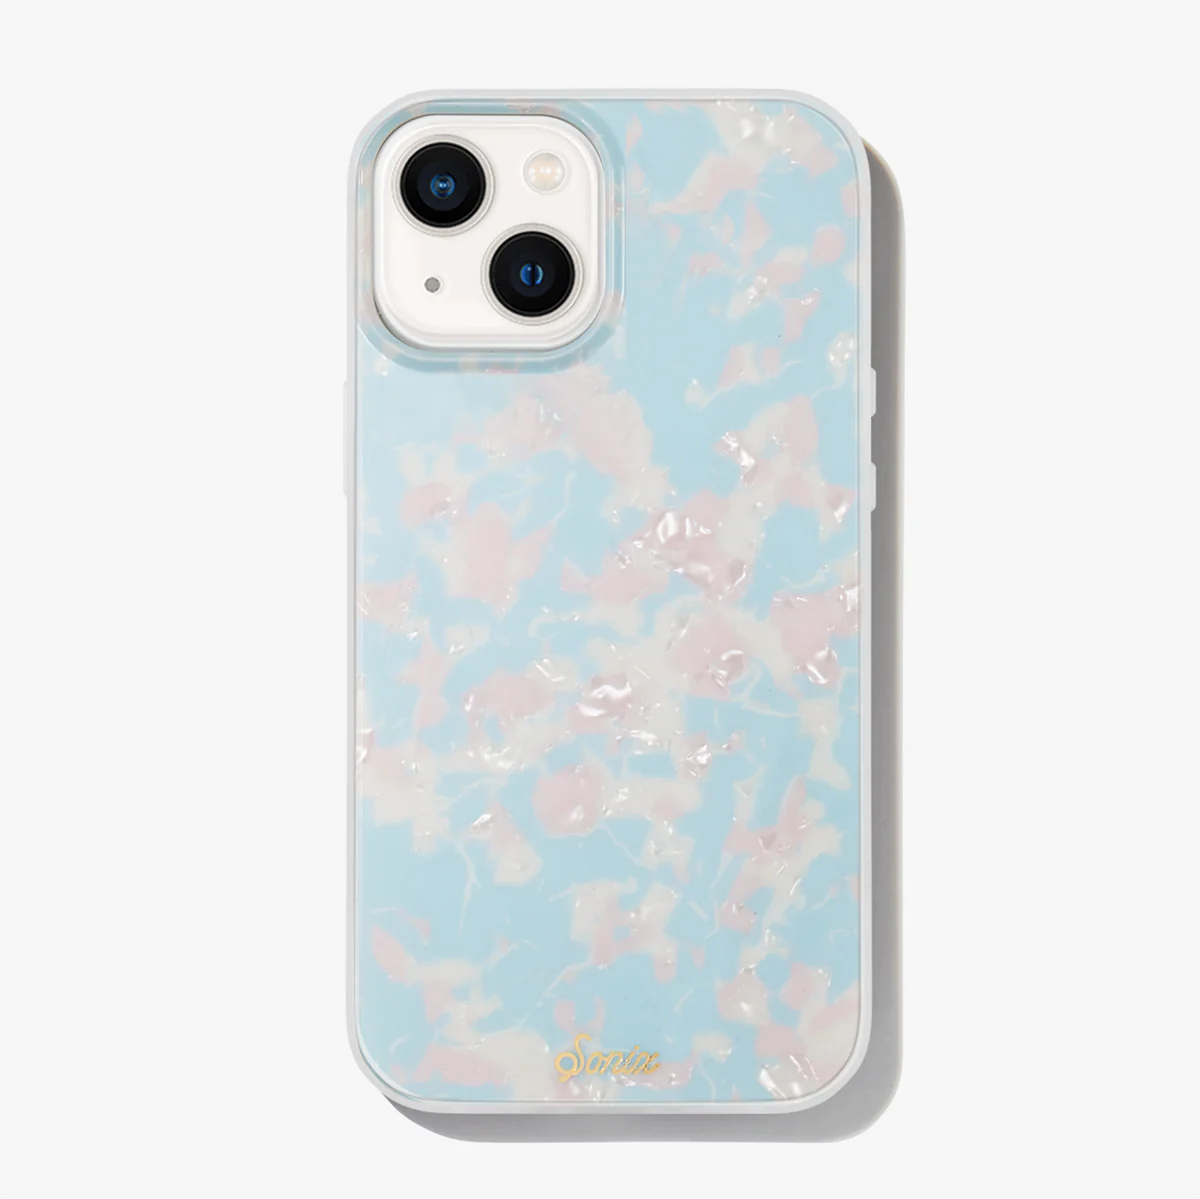 cotton candy tort phone case